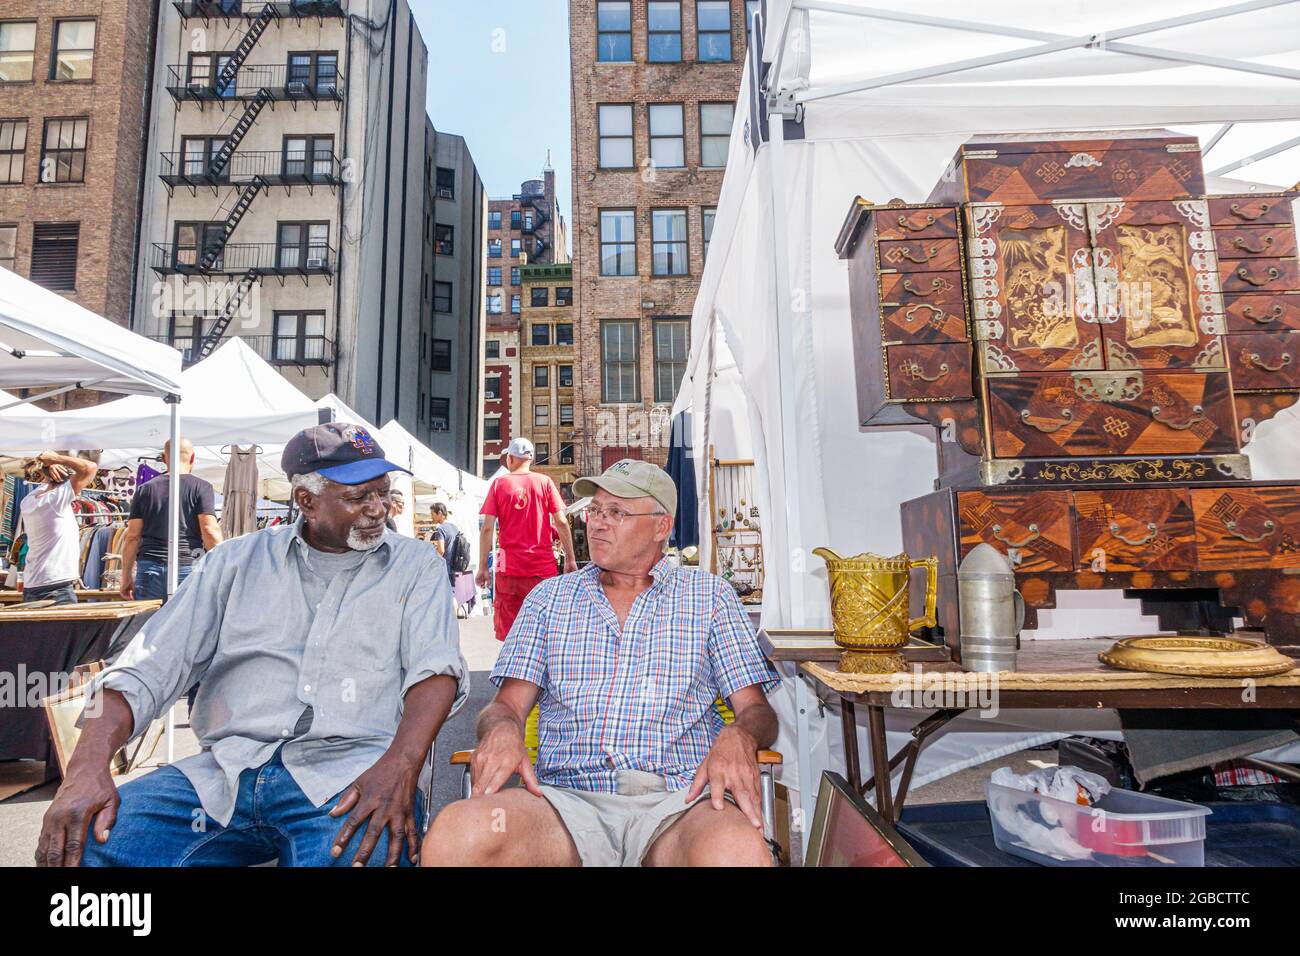 New York City,NY NYC,Manhattan Chelsea Flea Market,weekly open-air shopping marketplace antiques collectibles vendors booths stalls,Black men sitting Stock Photo